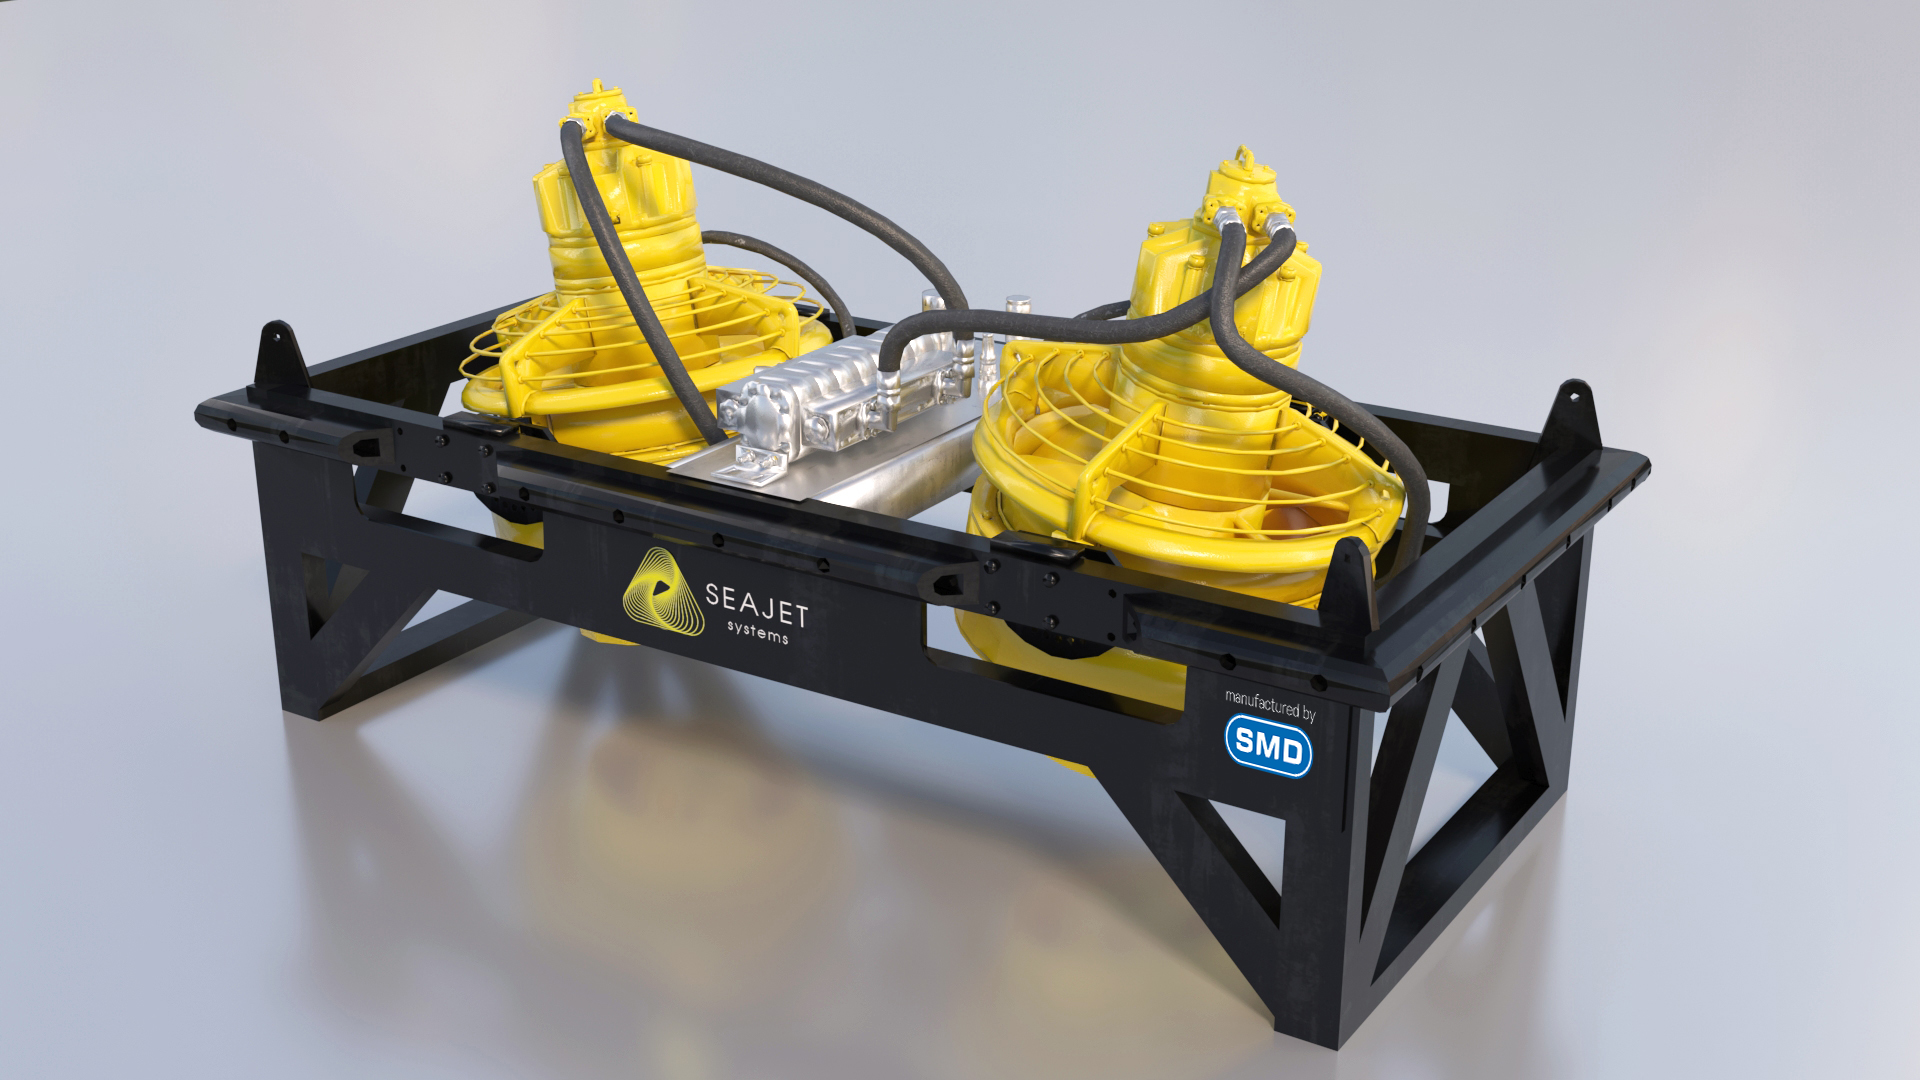 SMD and SEAJET Systems partner up for subsea technology